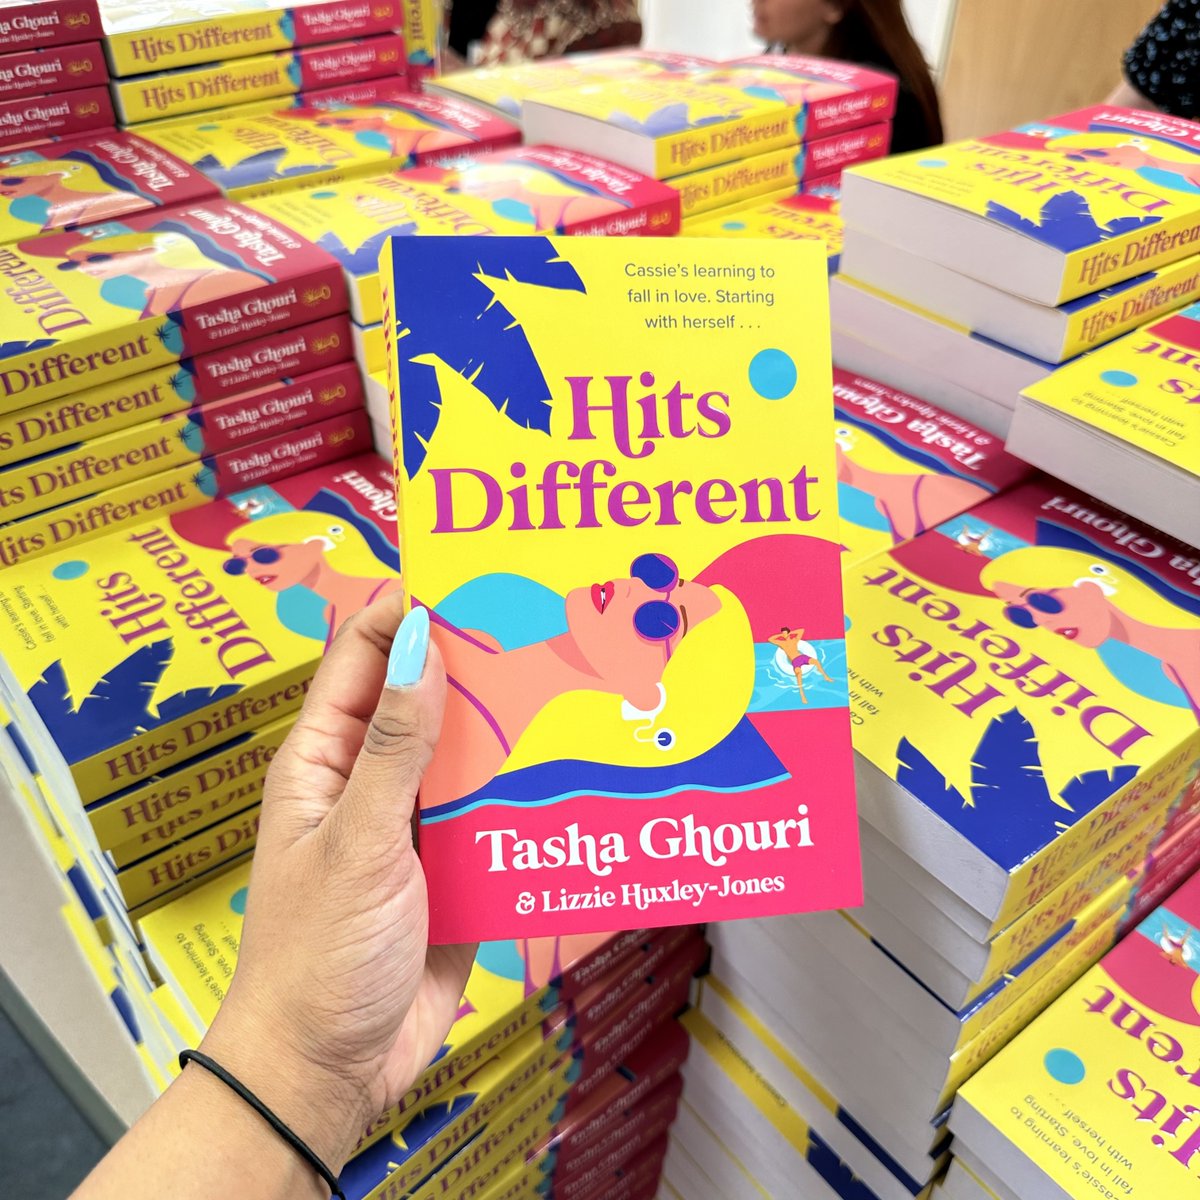 Decided to make our own summer this year! Final copies of HITS DIFFERENT by Tasha Ghouri and @littlehux are in and the two-week countdown to pub day officially begins ☀️ lnk.to/Hits-Different